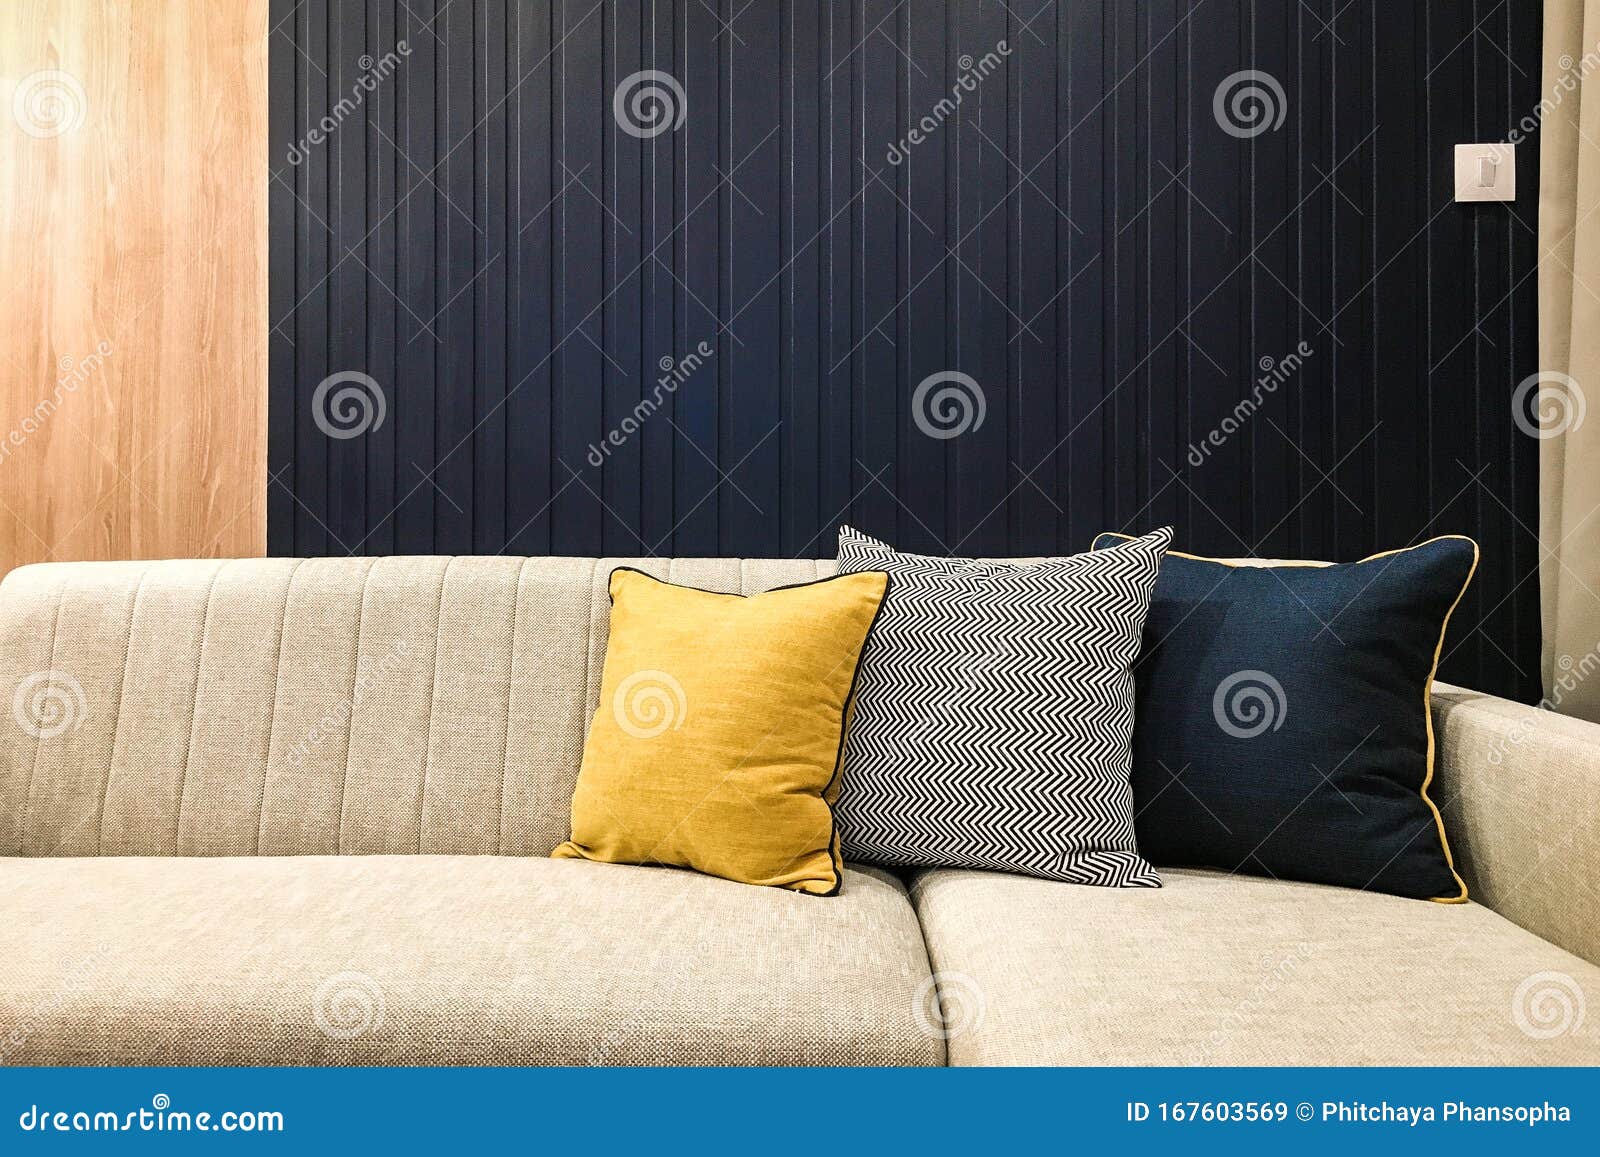 Simple Modern Living Room Inside The Condominium Stock Image Image Of Couch Elegance 167603569